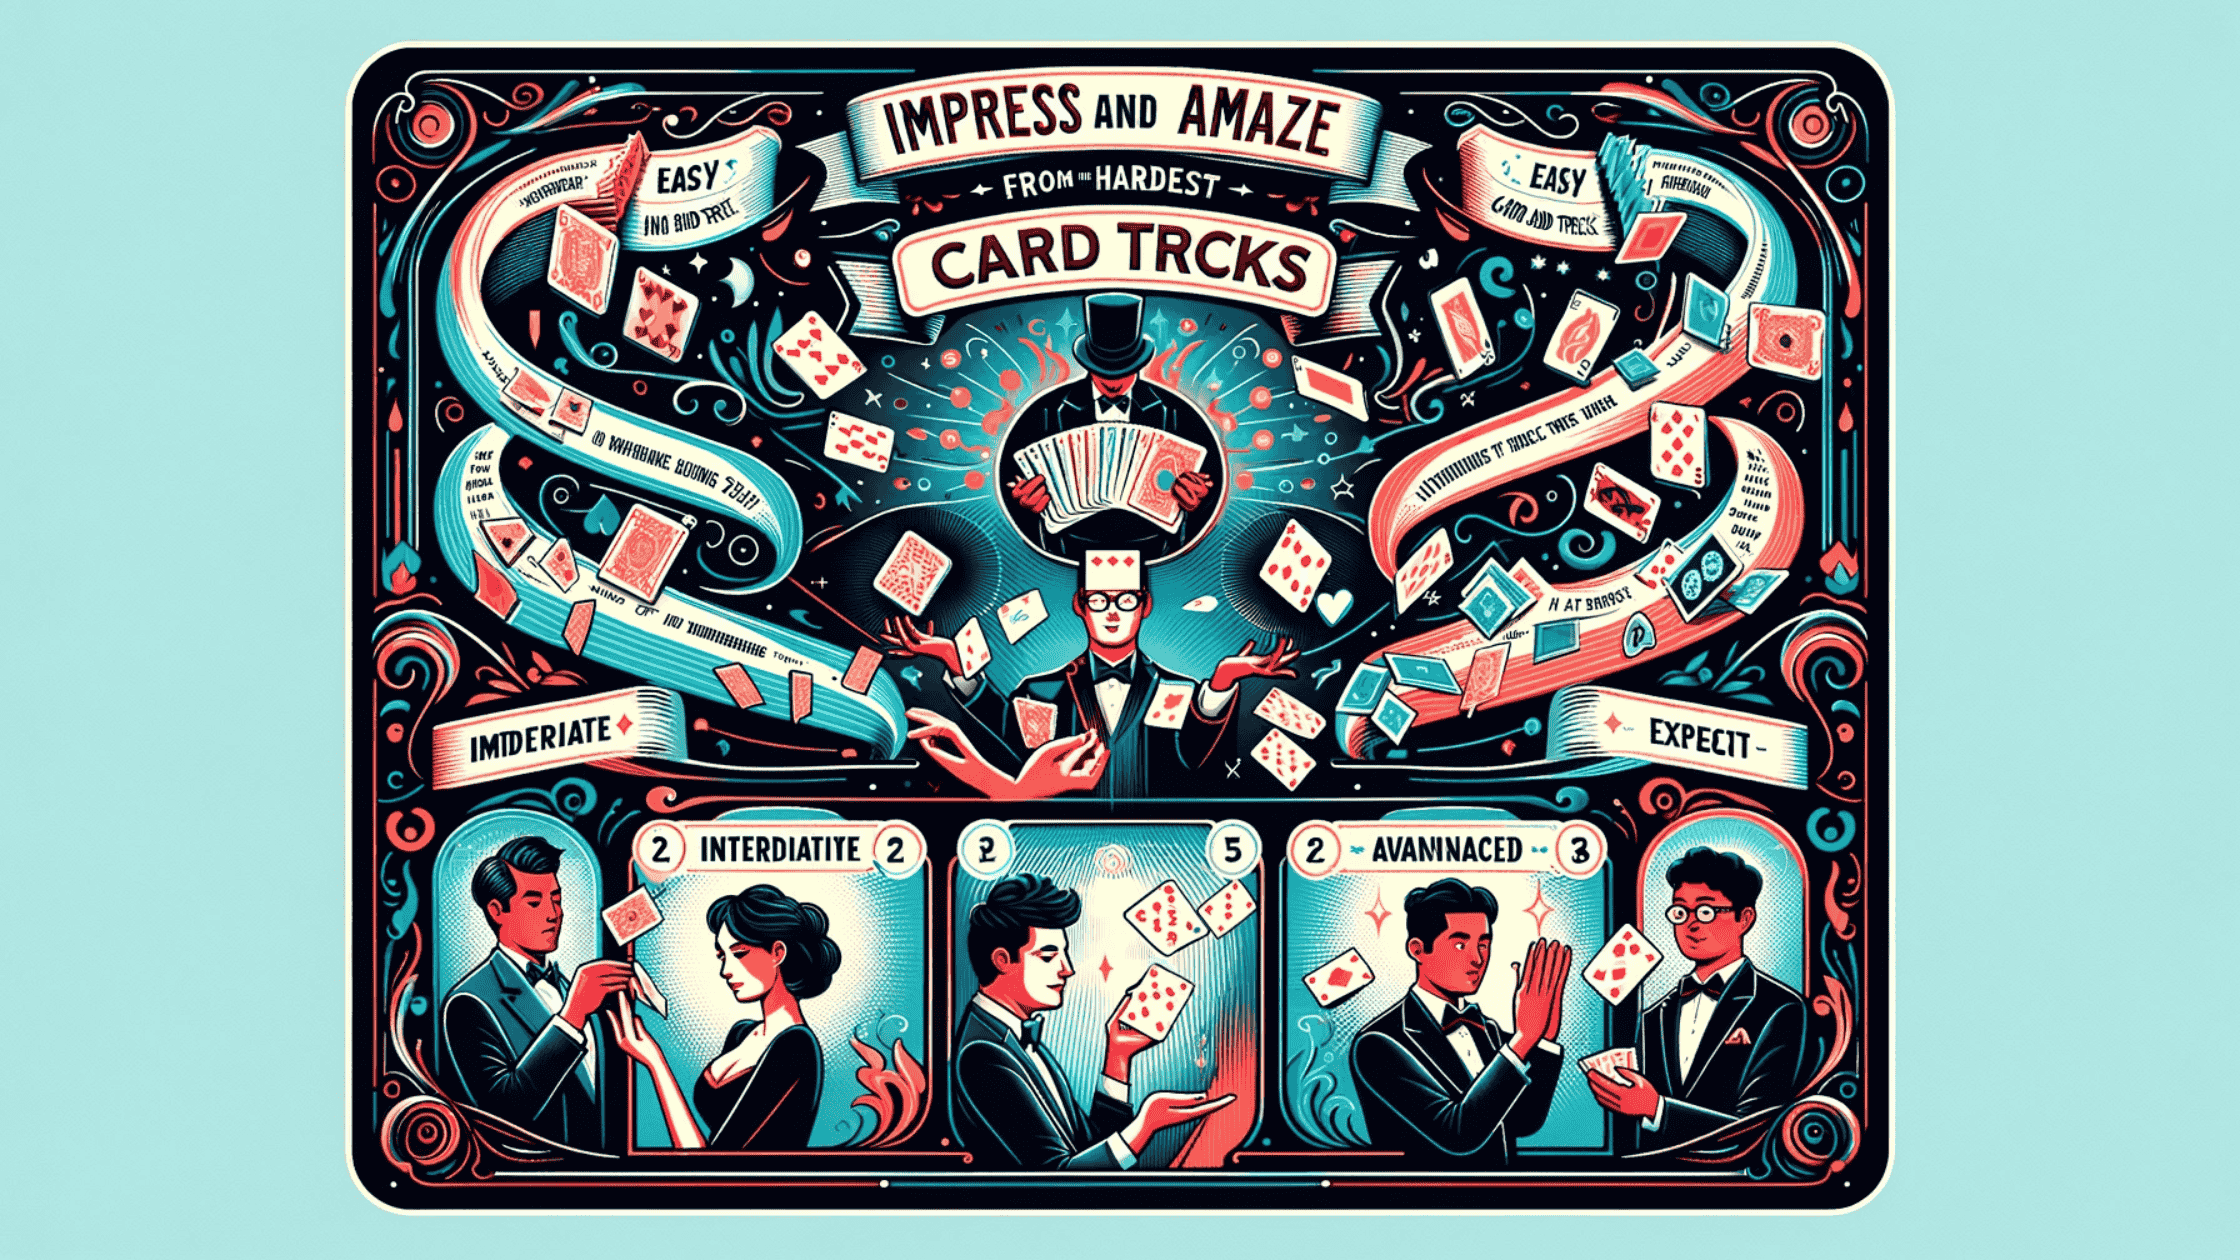 From Easy to Hardest Card Tricks